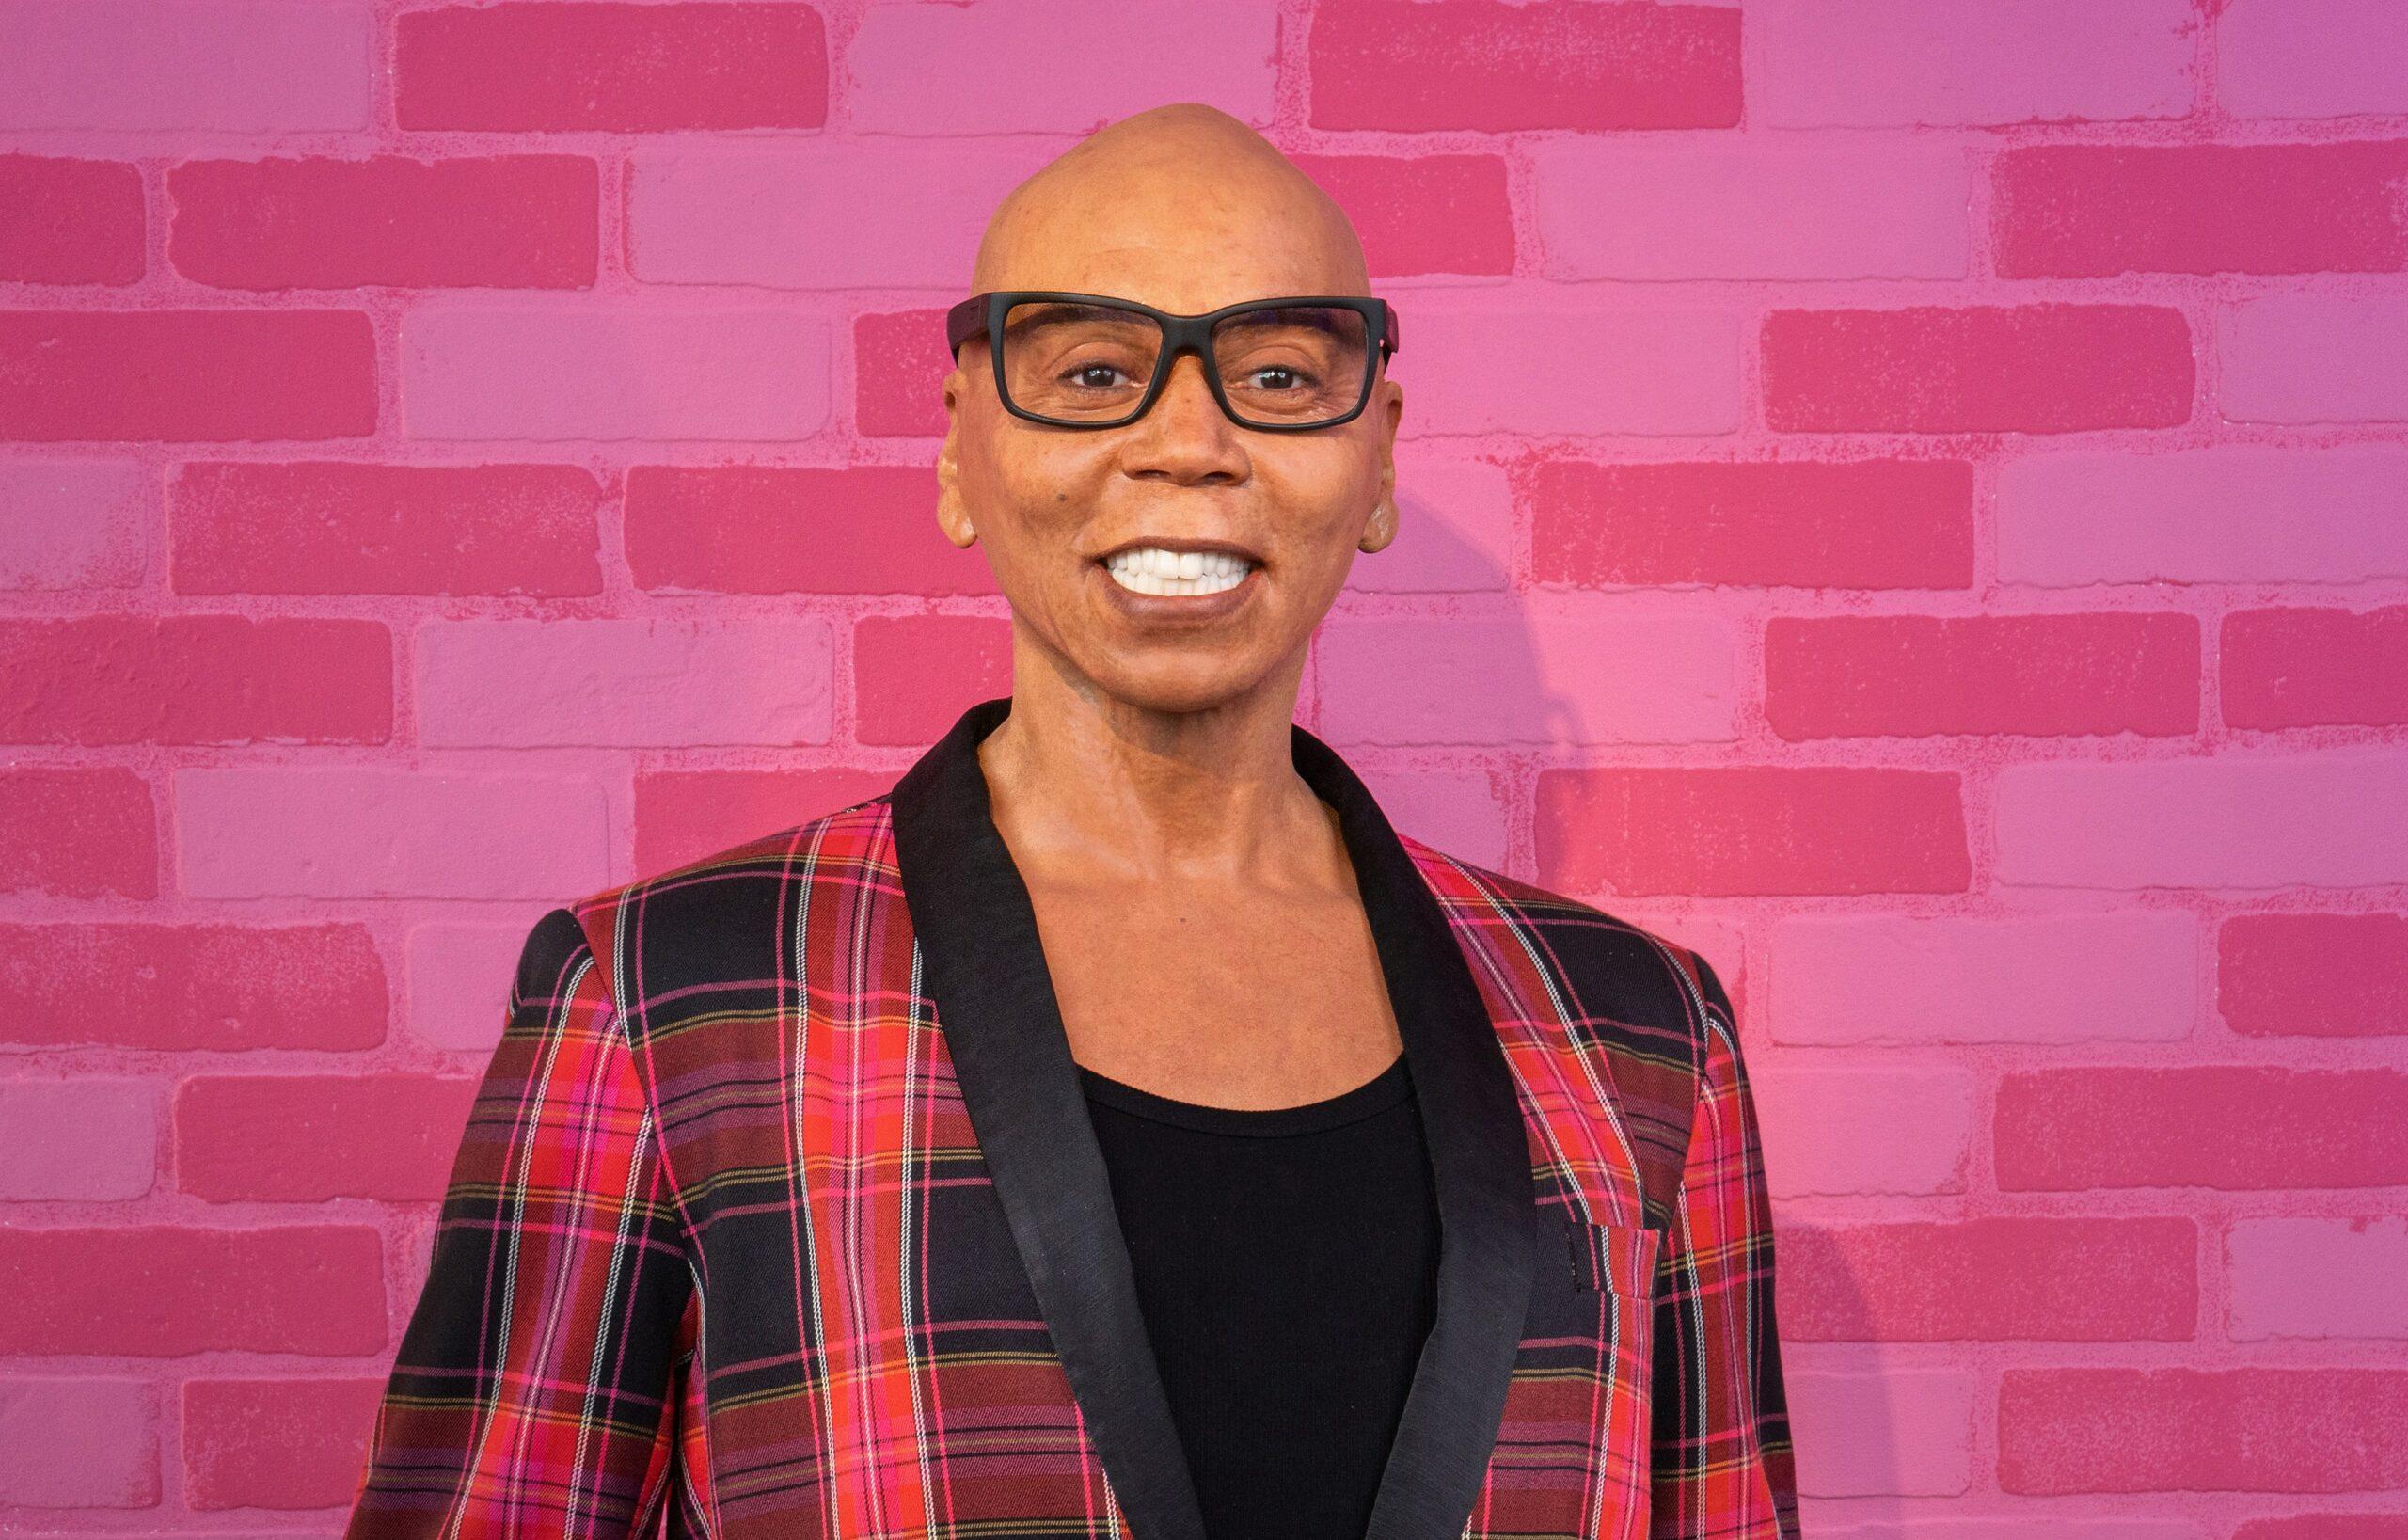 RuPaul reveals his male persona in new Las Vegas waxwork out of drag